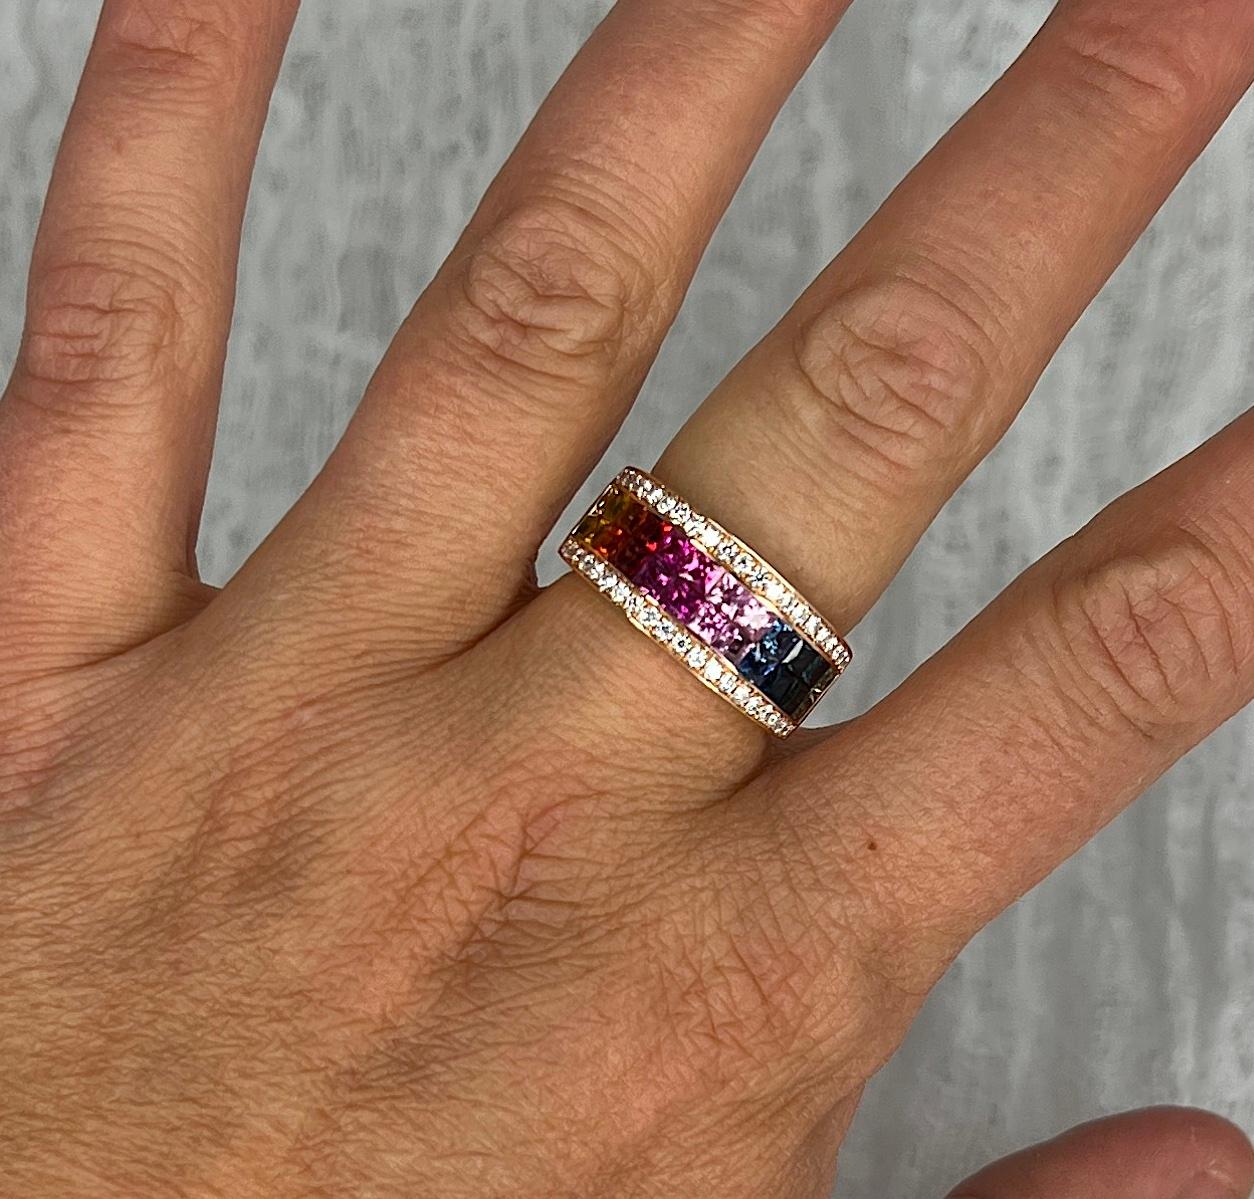 S.Georgios designer presents this gorgeous 18 Karat Rose Gold Band Ring with two rows of invisible set Rainbow color Princess Cut natural Sapphires with a total weight of 2.82 Carats and 0.39 Carat Brilliant Cut White Diamonds on the sides.
This